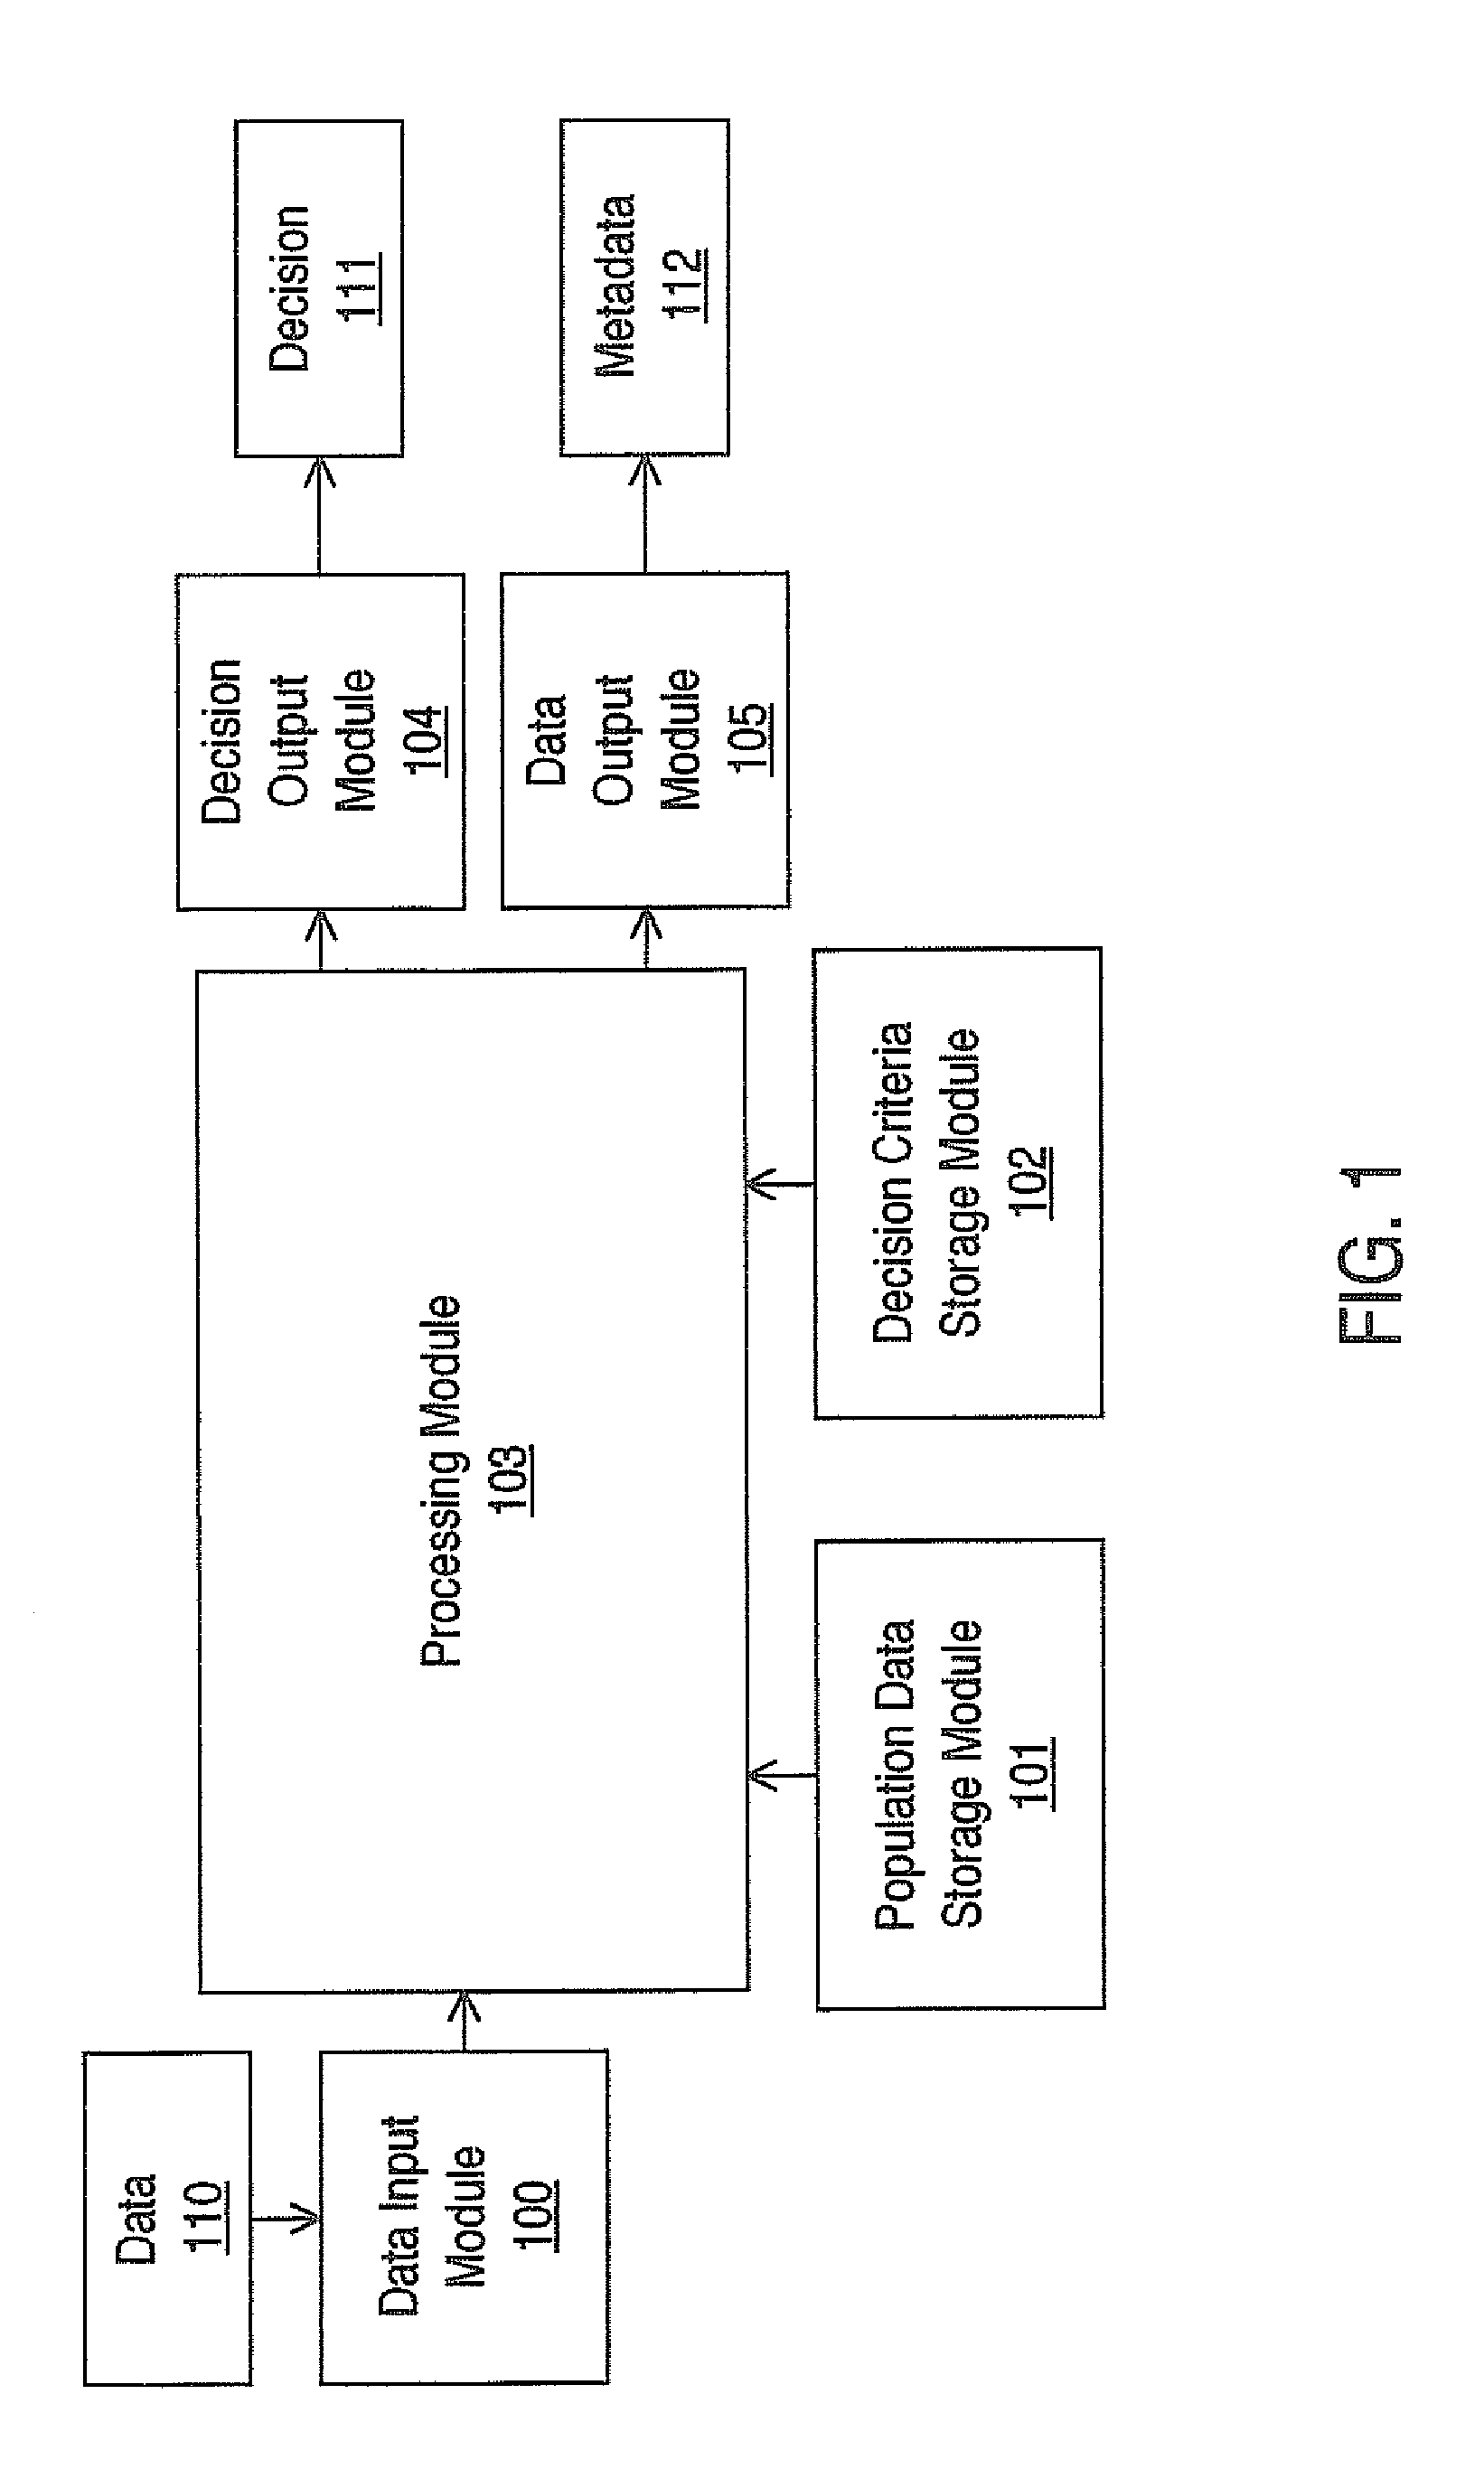 Computerized system for adaptive radiation therapy